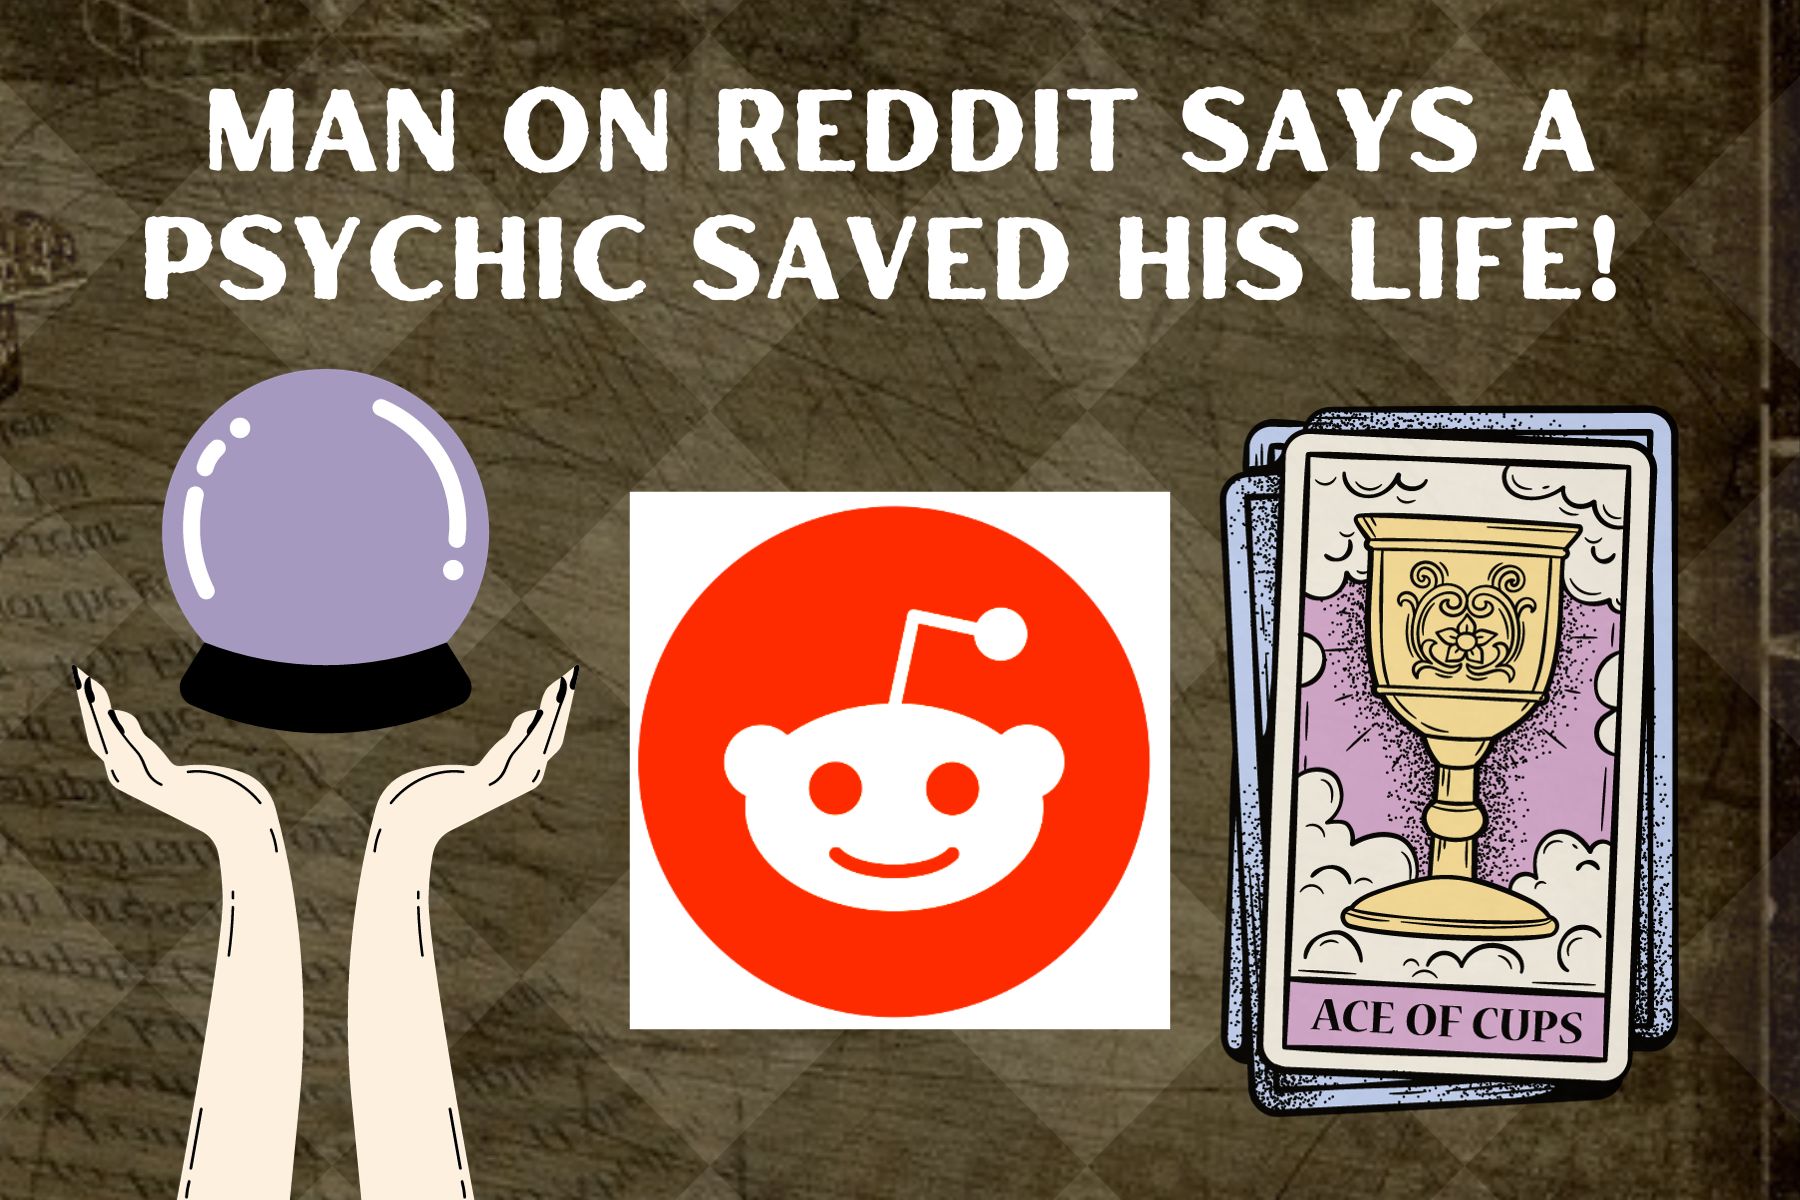 A User Posts on Reddit About How A Psychic Saved His Life